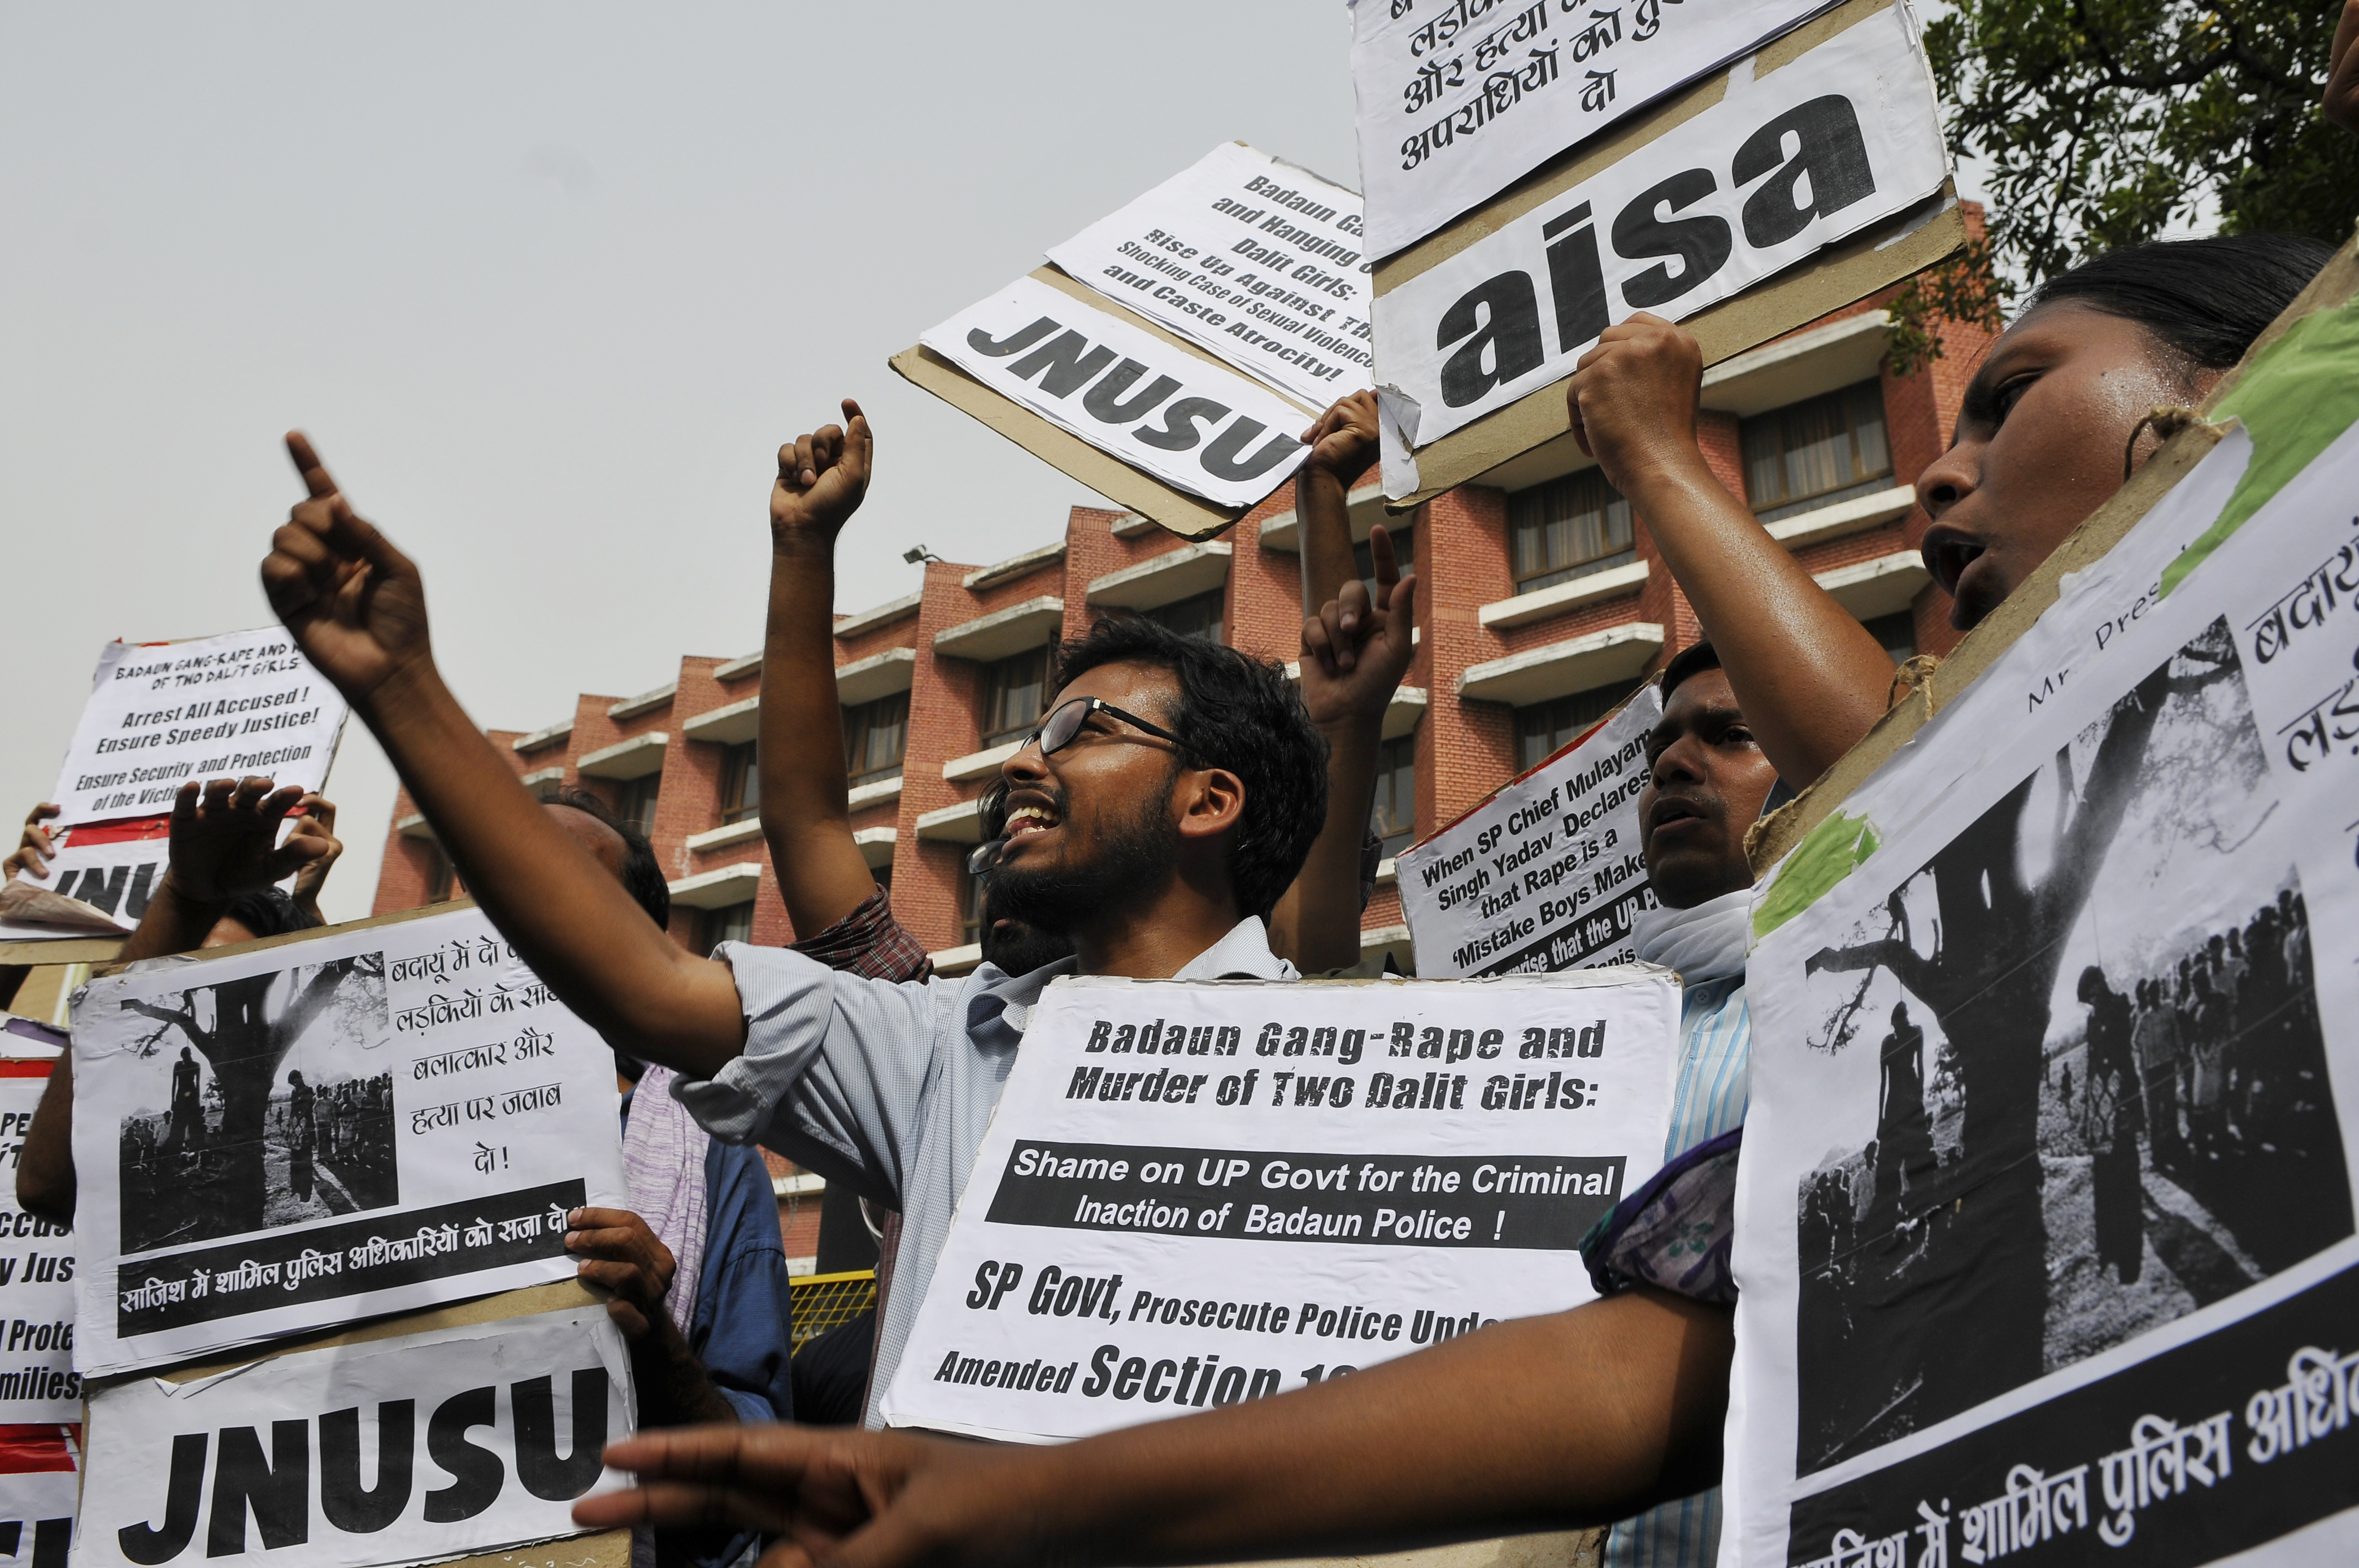 Jawaharlal Nehru University Students Union activists shouting slogans in front of Uttar Pradesh Bhawan against the gruesome gang-rape and hanging of two Dalit girls in Badaun, demanding immediate arrest of all the culprits on May 30, 2014 in New Delhi, India. (Hindustan Times—Hindustan Times via Getty Images)